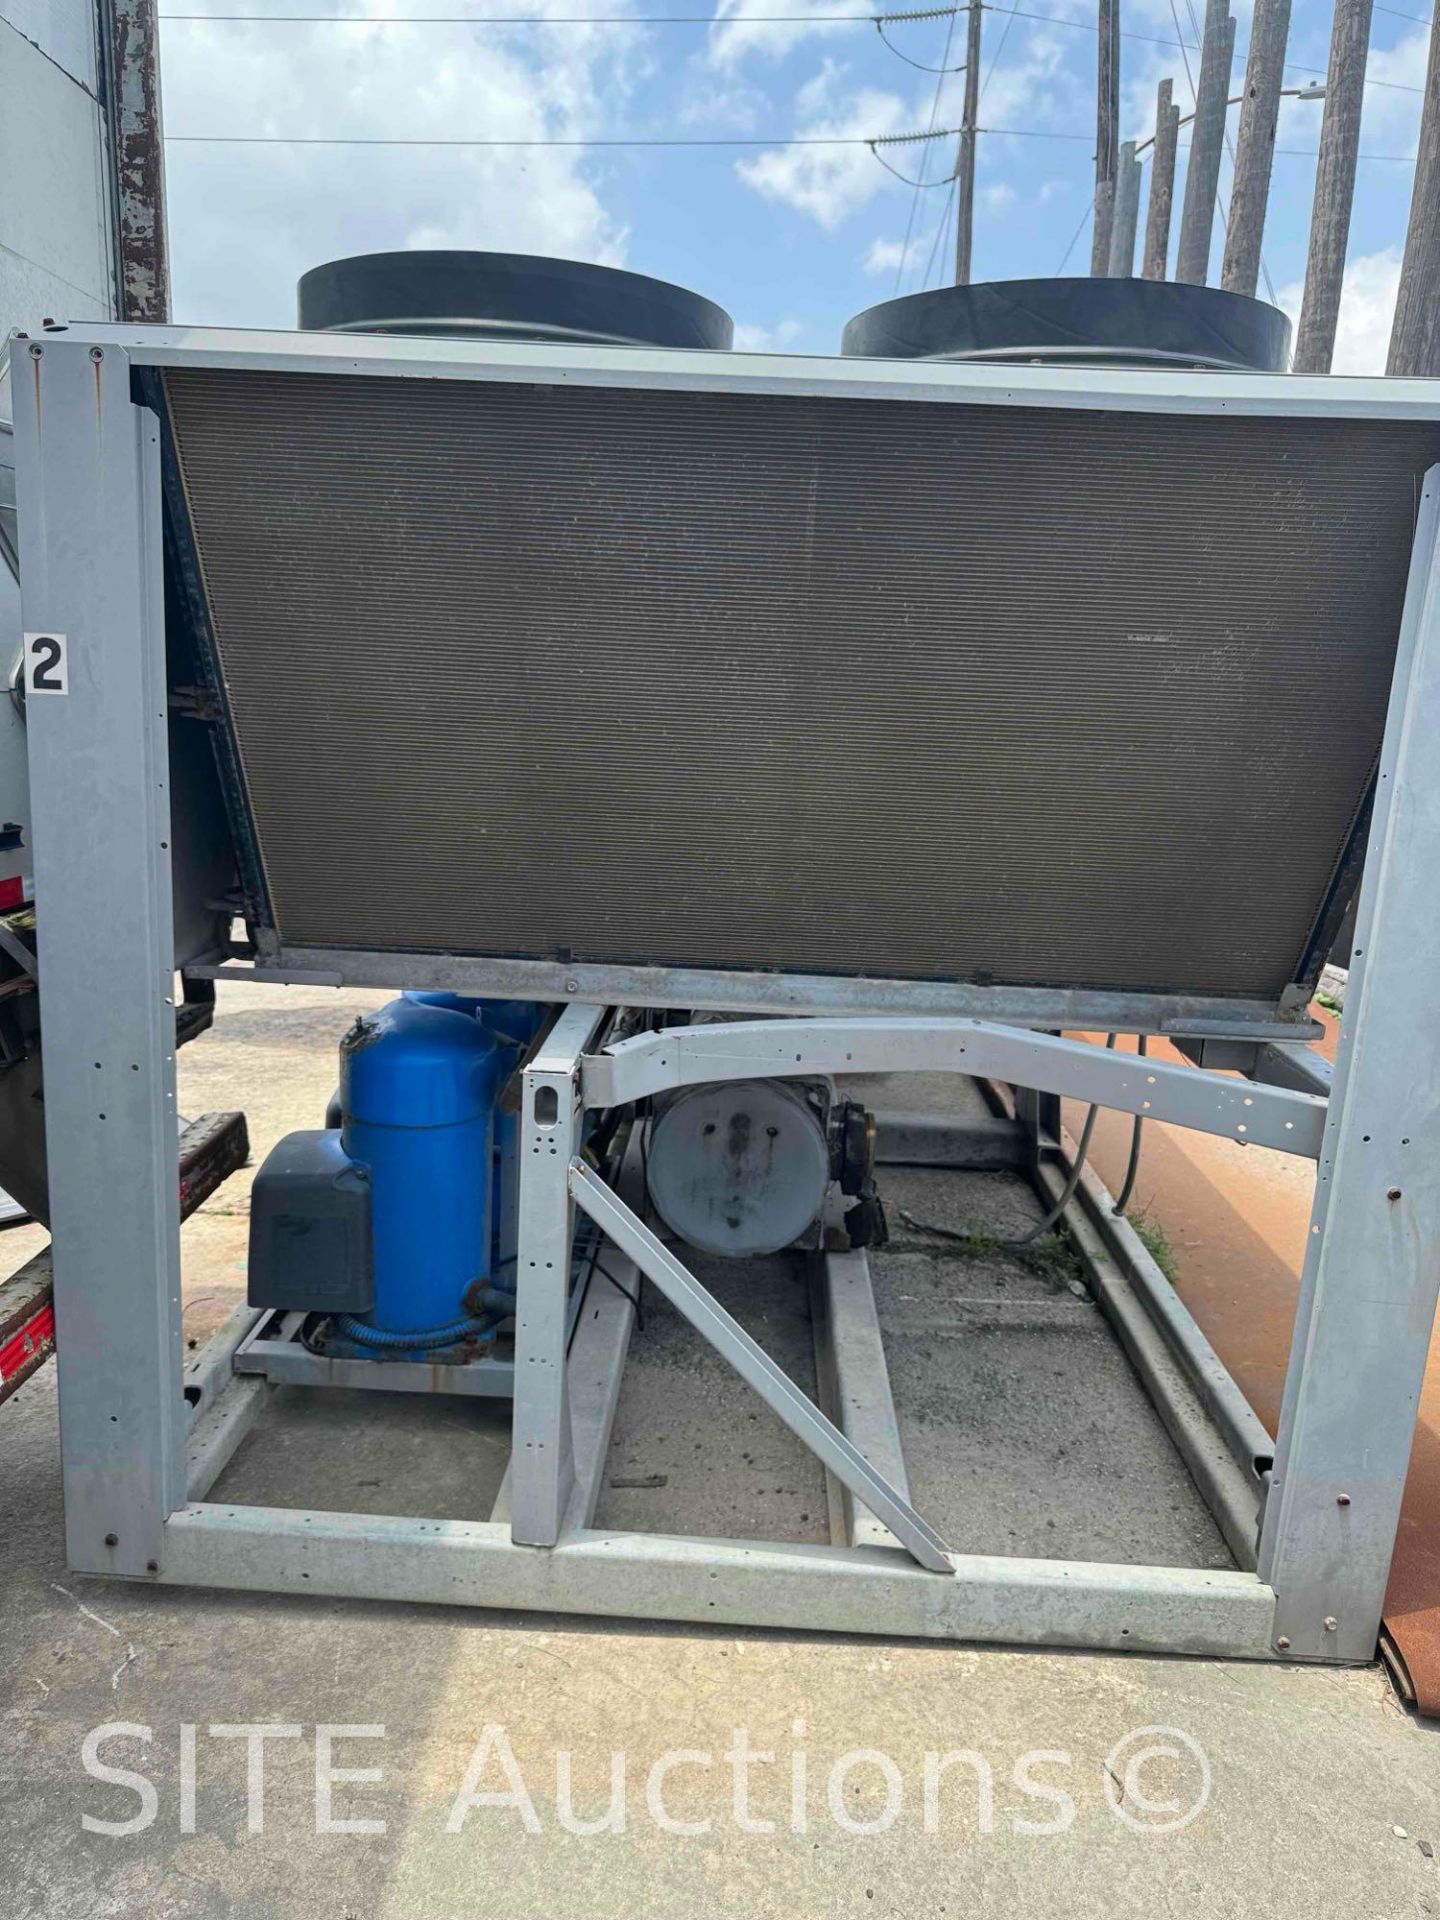 2008 Carrier 30RB Air-Cooled Liquid Chiller - Image 2 of 14